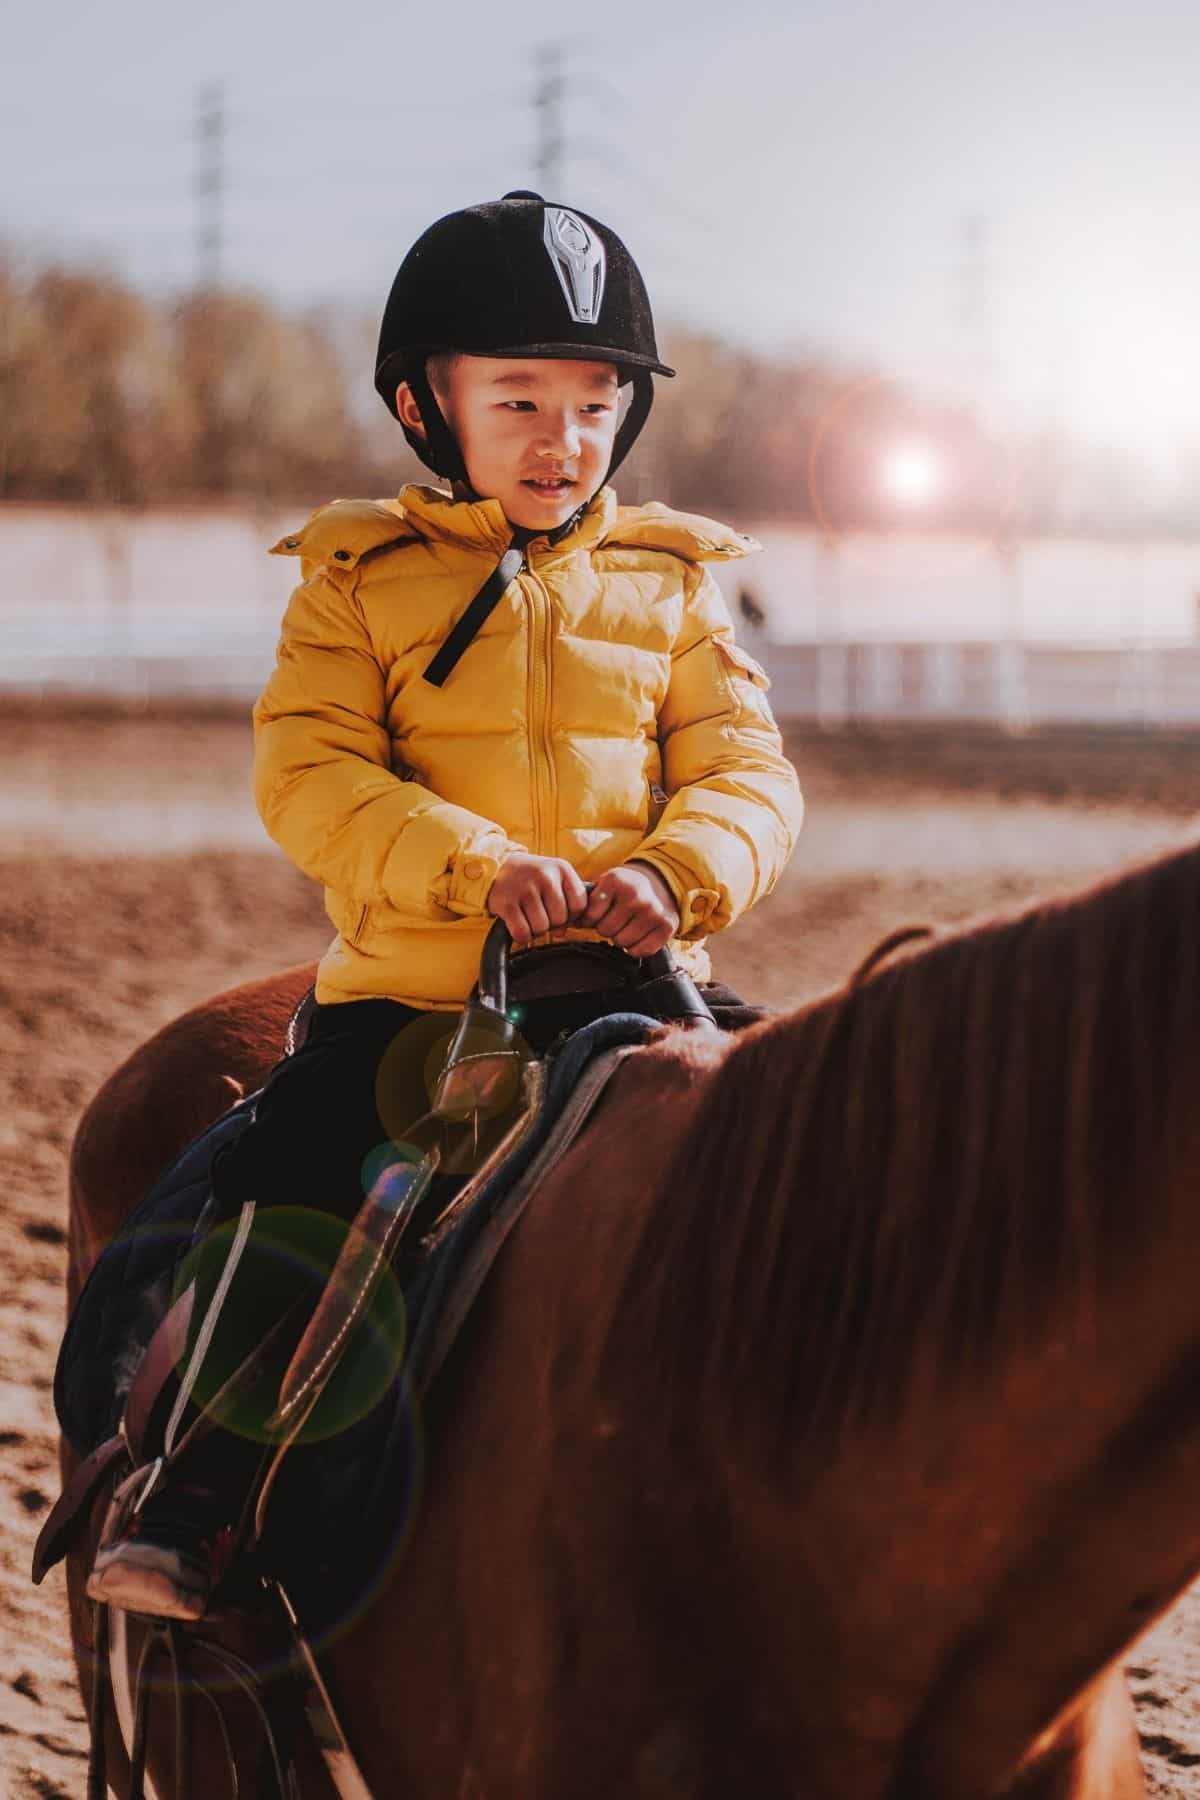 Child in yellow coat on horse